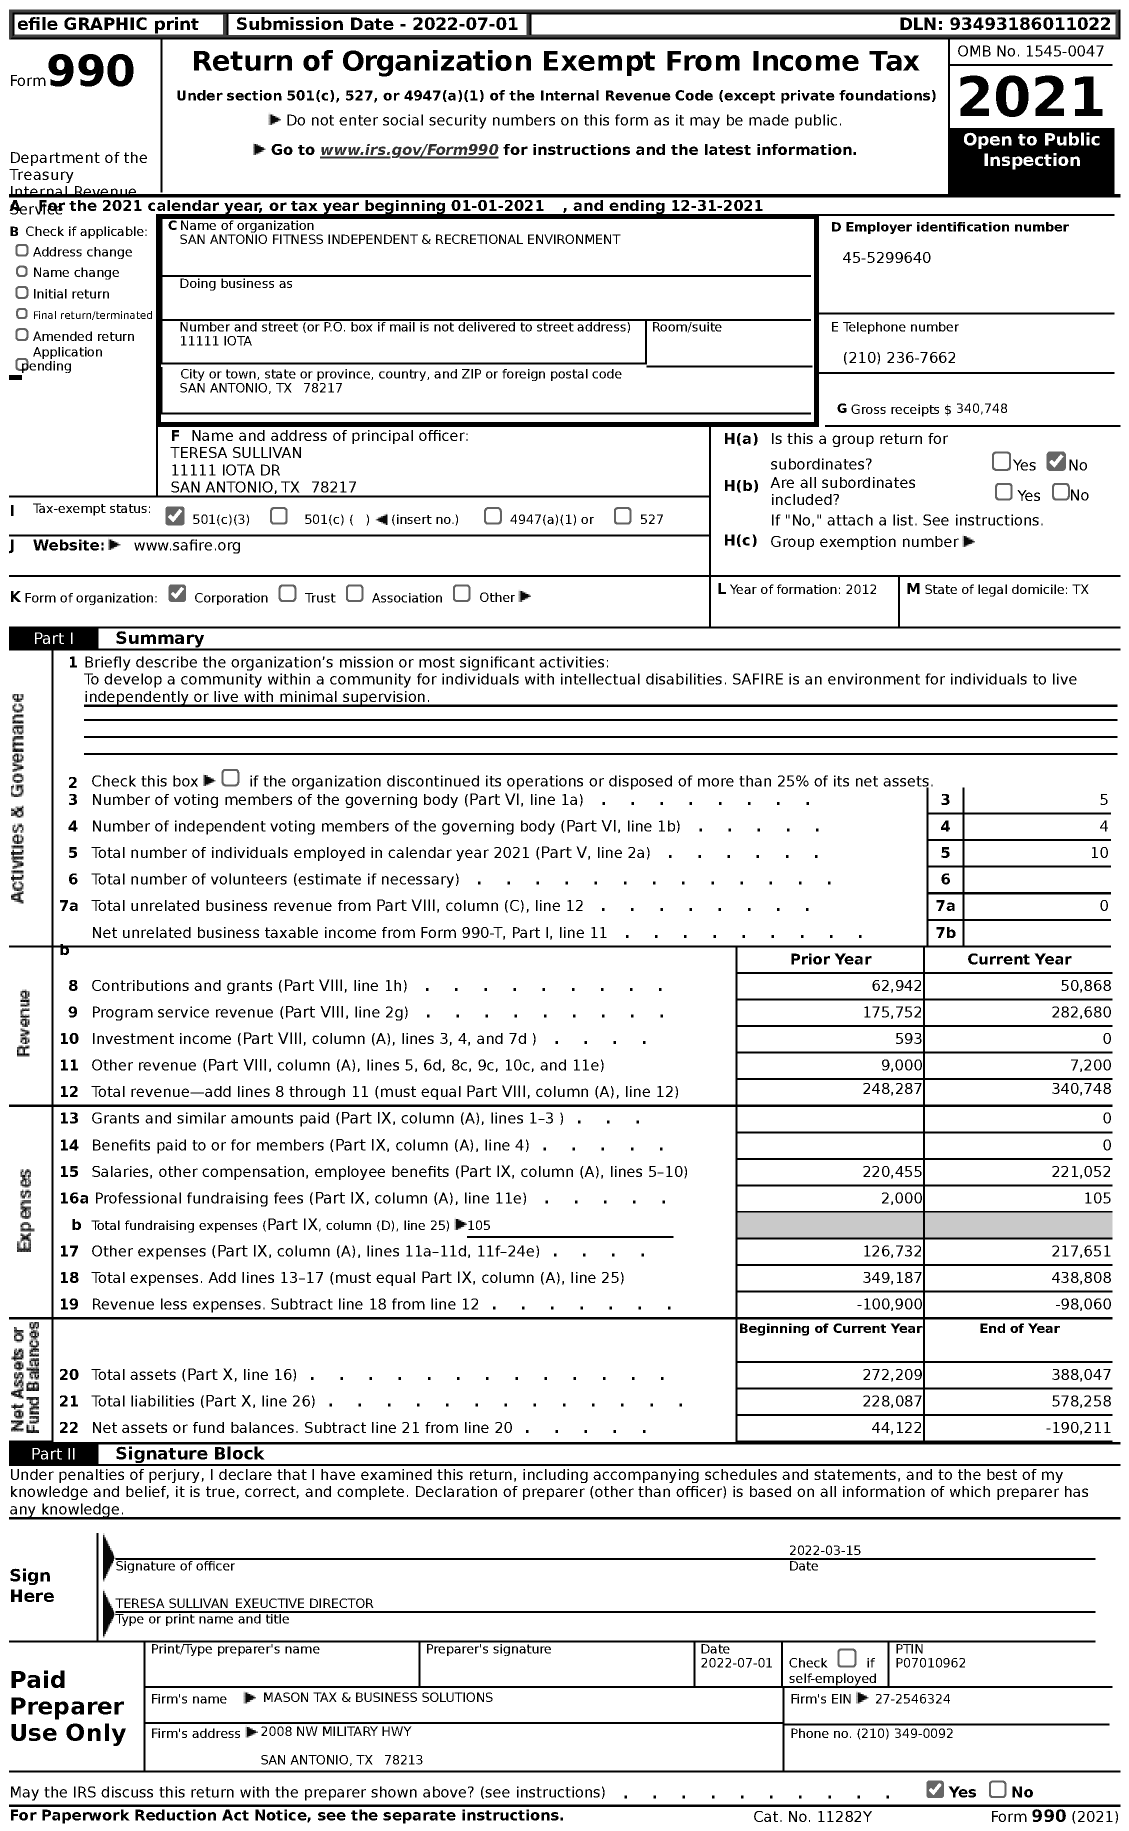 Image of first page of 2021 Form 990 for San Antonio Fitness Independent and Recretional Environment